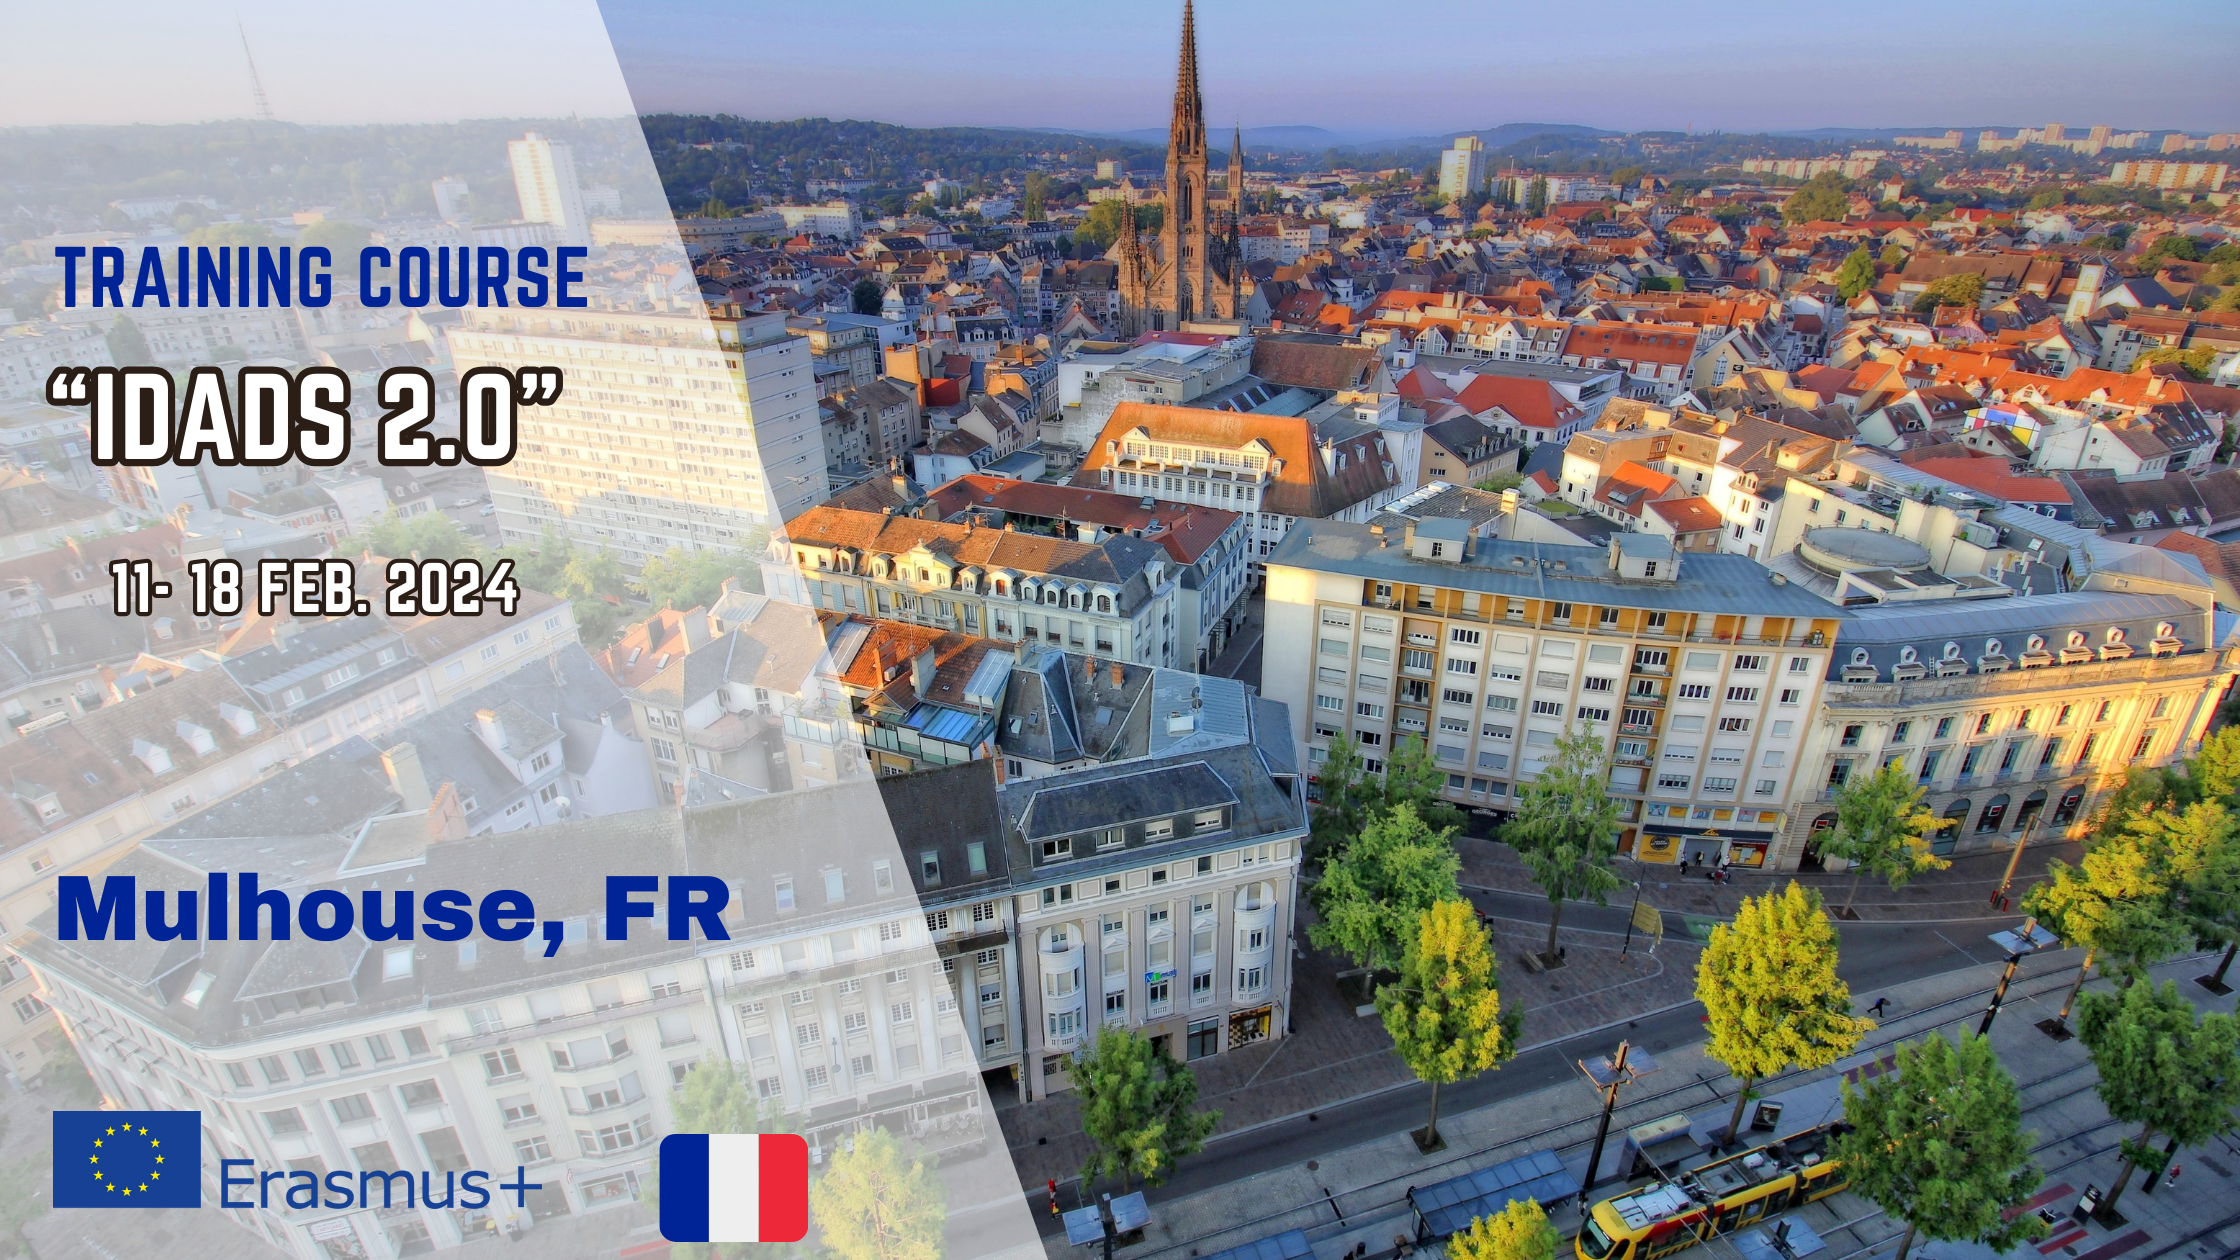 Training Course "Intercultural dialogue and democratic spaces 2.0" in France (Fully Funded)